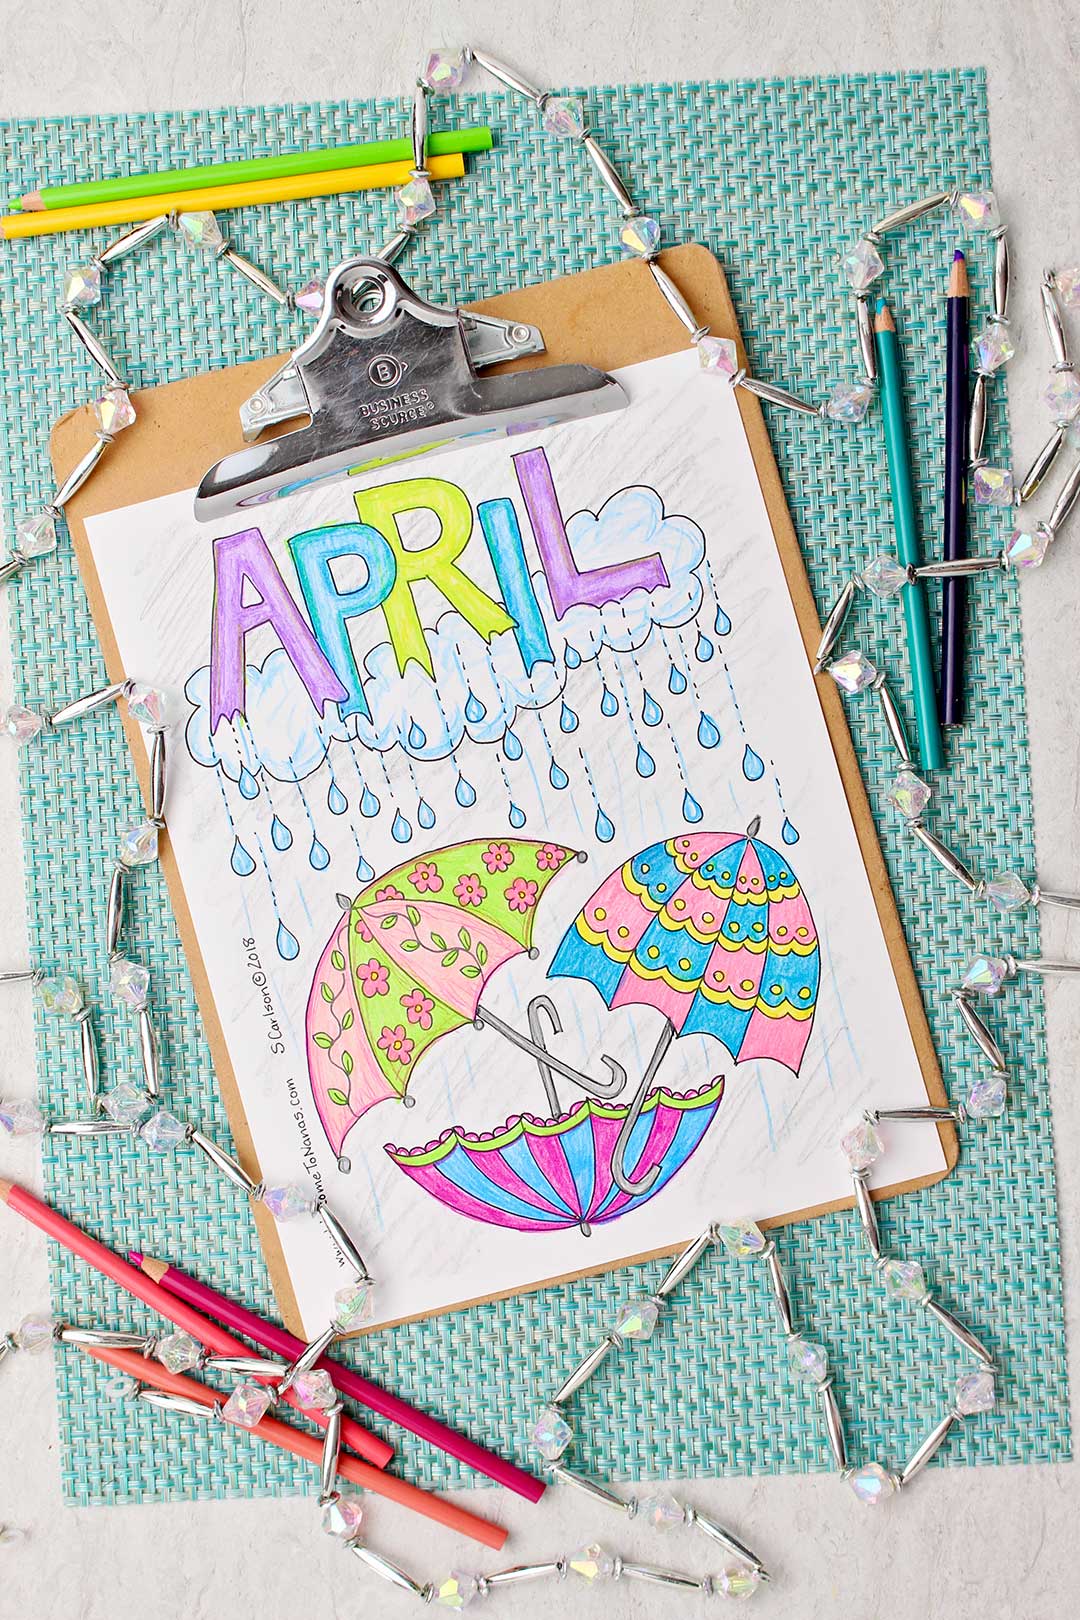 Completed April coloring page colored in shades of blue, pink, purple and green, sitting on an aqua placemat surrounded by a string of clear and silver beads and colored pencils.